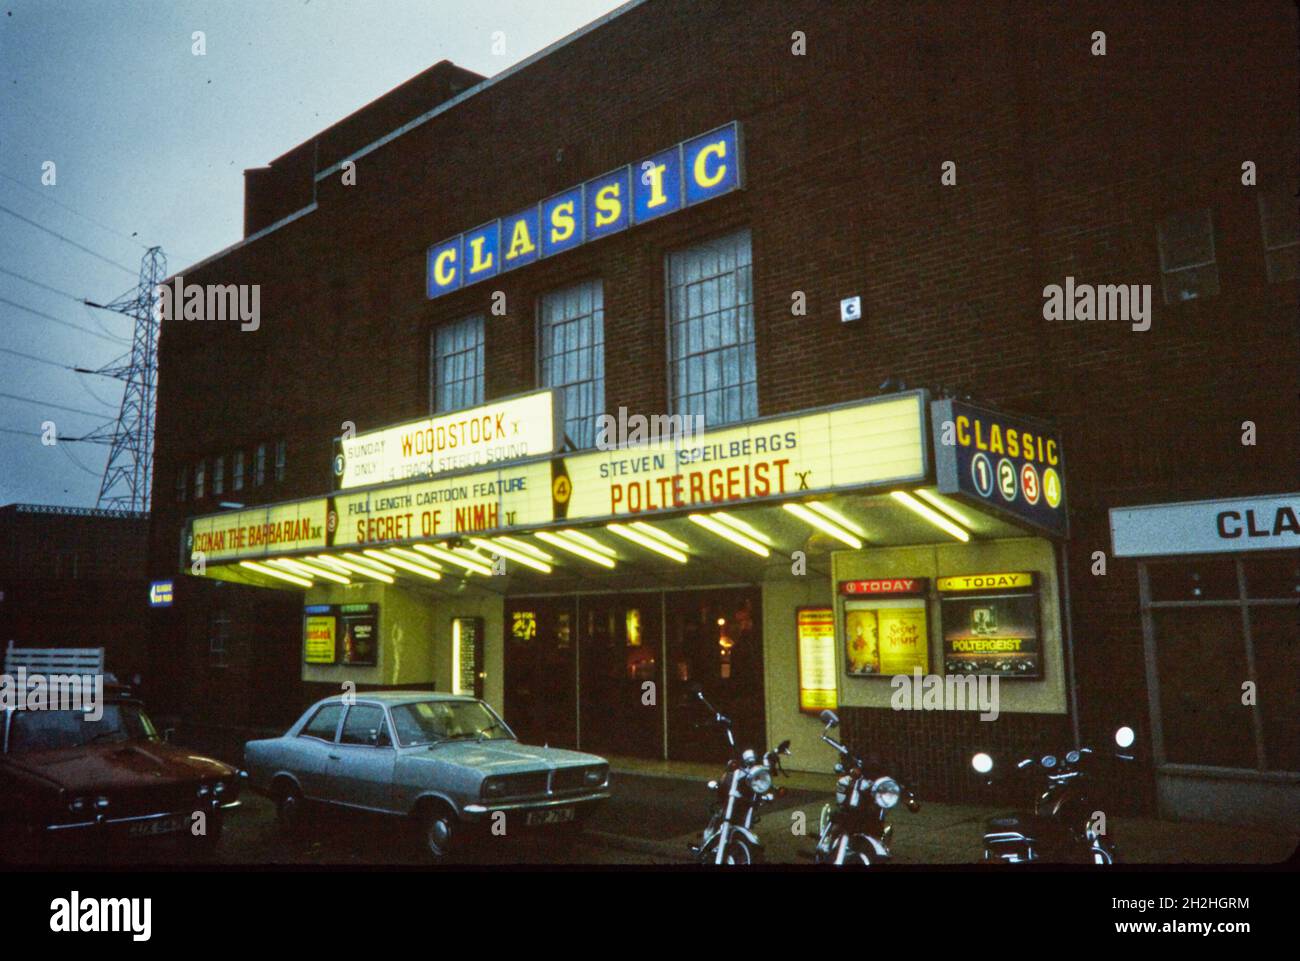 Classic Cinema, Hagley Road West, Quinton, Dudley, 1982. The Classic Cinema viewed from the south-east at dusk, showing the illuminated sign and billboard, with parked cars and motorcycles in front. The Danilo Cinema opened in 1939 and was the largest in Mortimer Dent's chain of Danilo Cinemas. It was later taken over by Essoldo, Classic, Cannon, ABC, Odeon, and finally by Reel Cinemas. In the early 21st century Reel Cinemas restored the building's facade to its original art deco style. Stock Photo